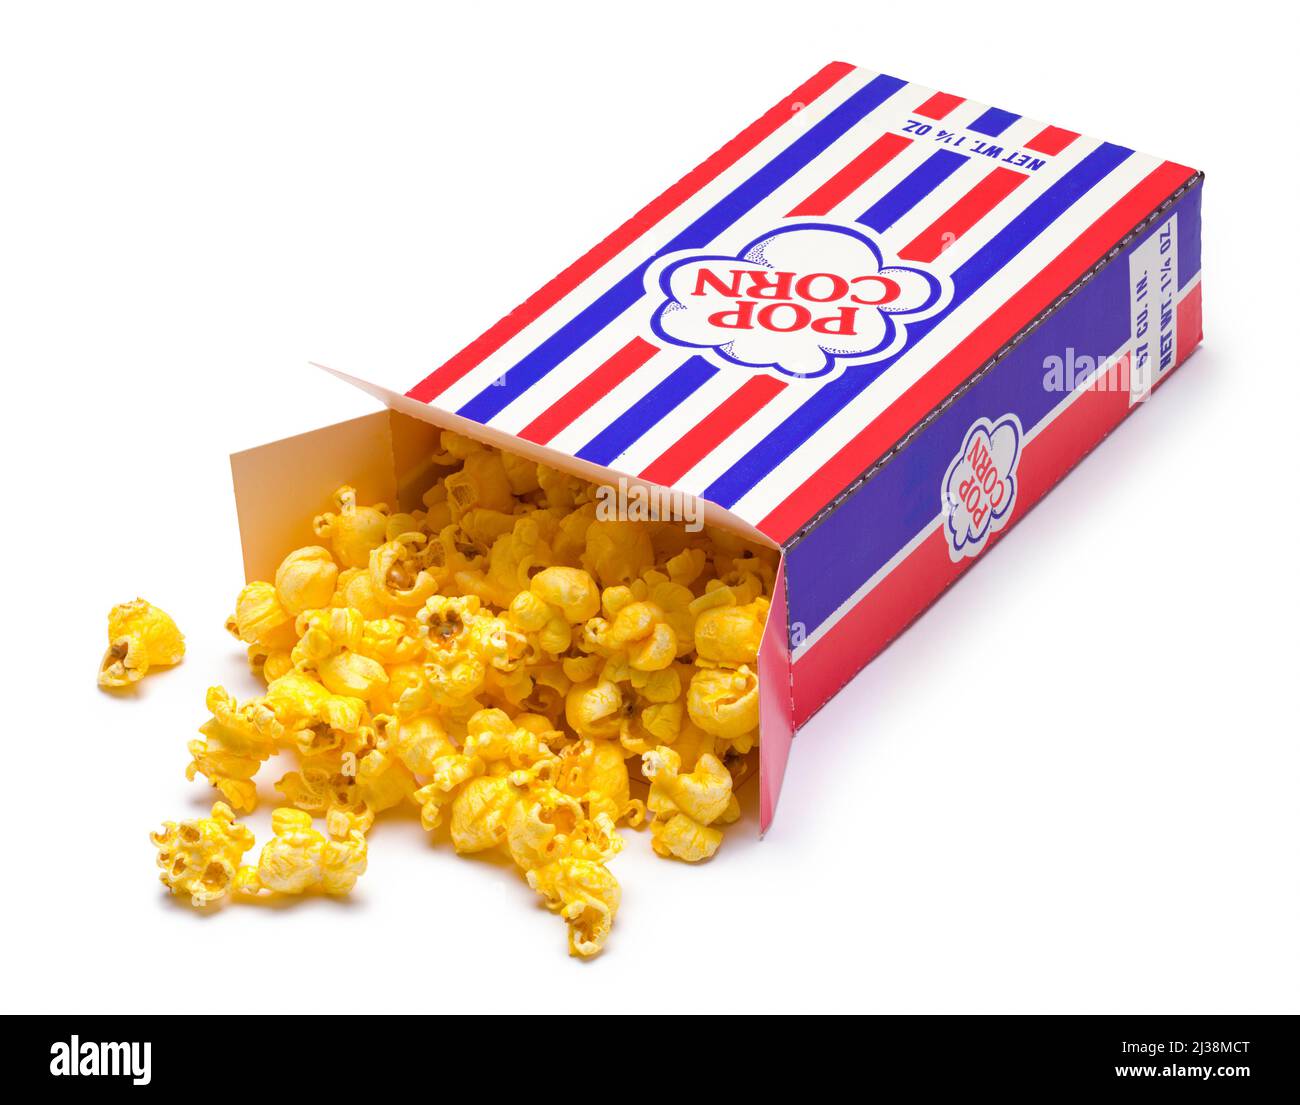 Spilled Box of Popcorn Cut Out on White. Stock Photo